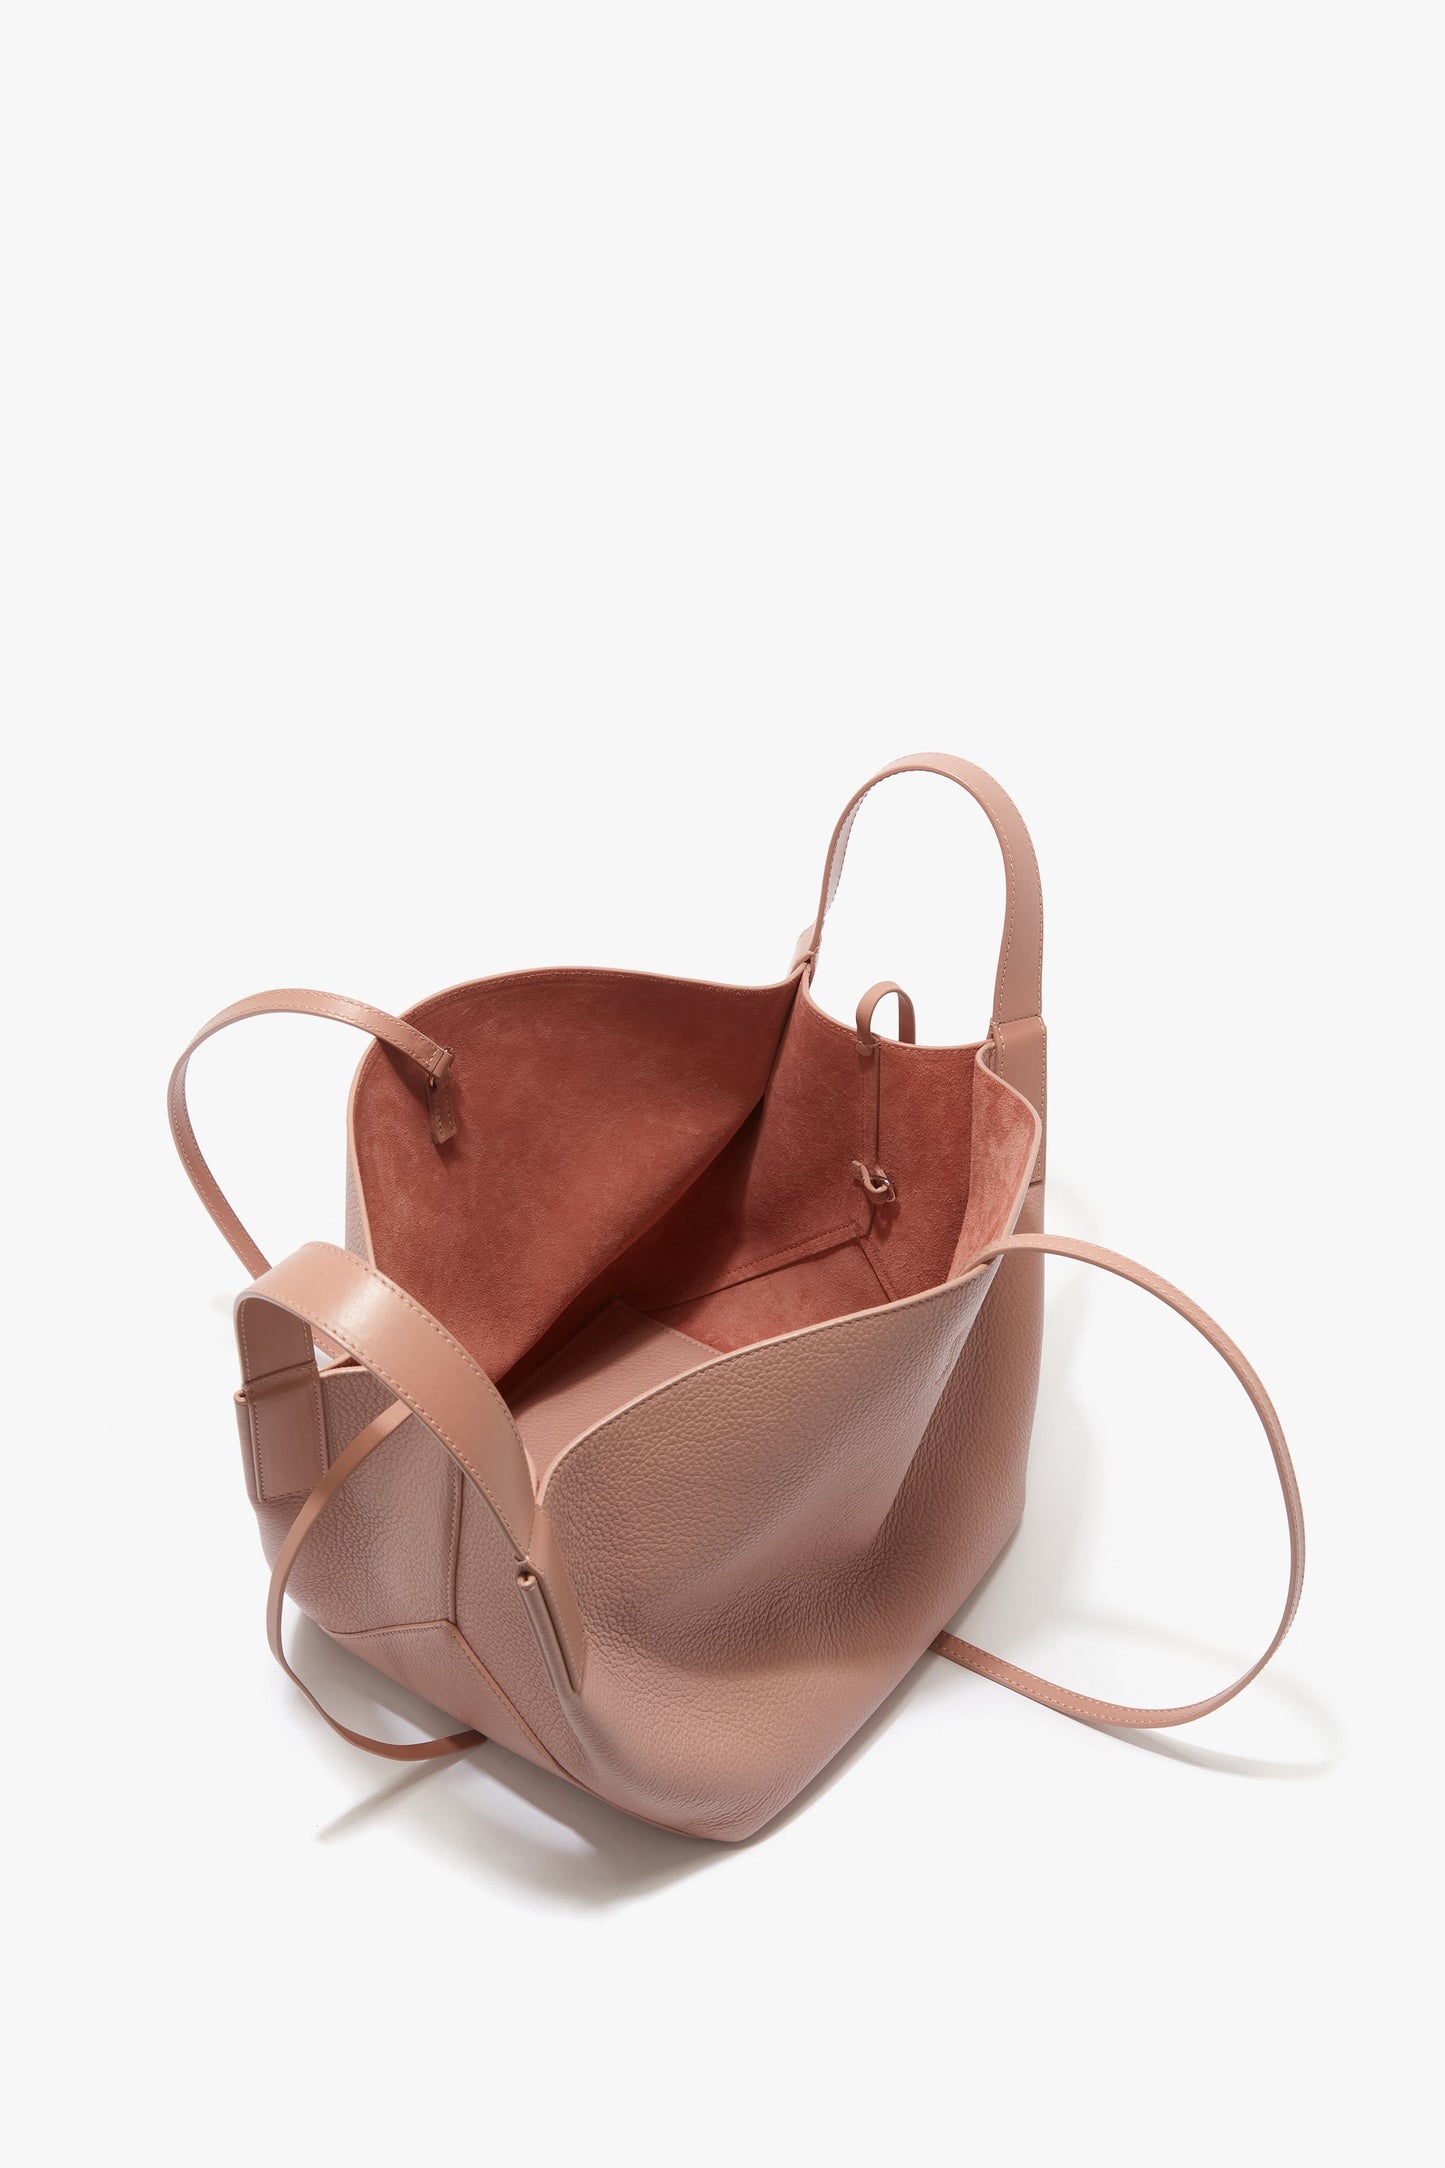 An open, empty W11 Mini Tote Bag In Marshmallow Leather by Victoria Beckham in blush pink calf leather with long, thin shoulder straps and a soft fabric interior.